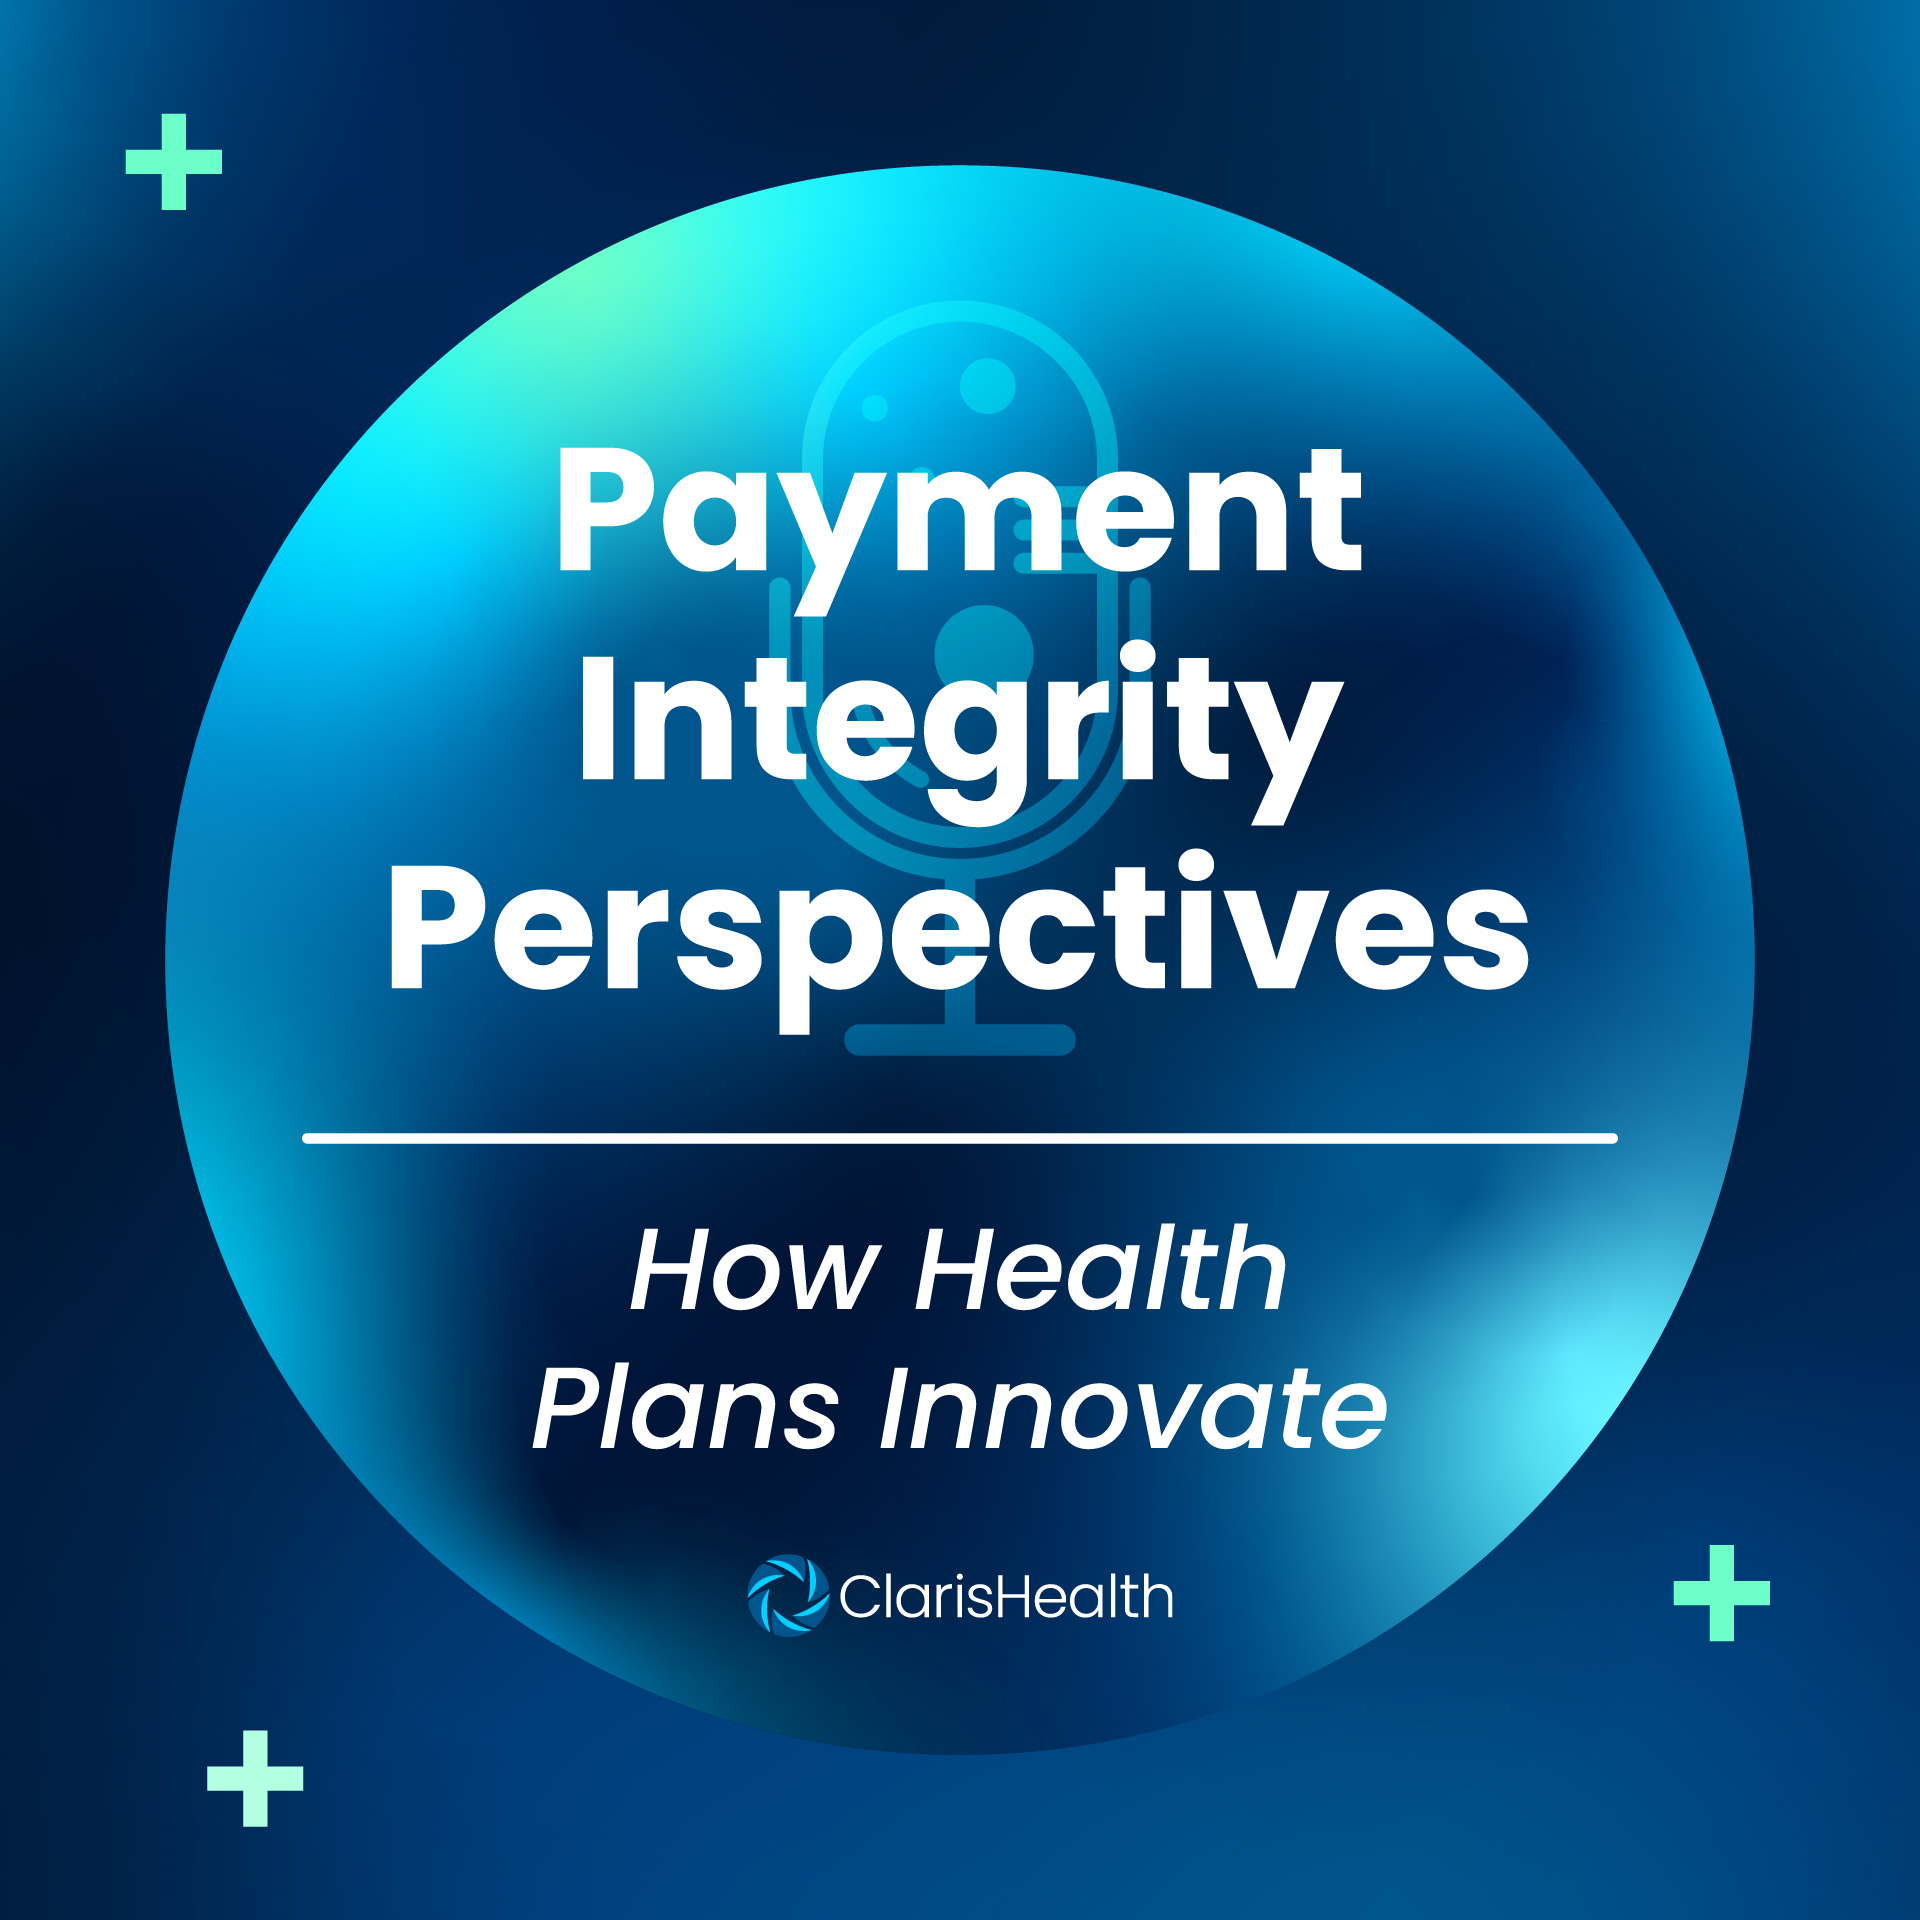 A Vision for Payment Integrity